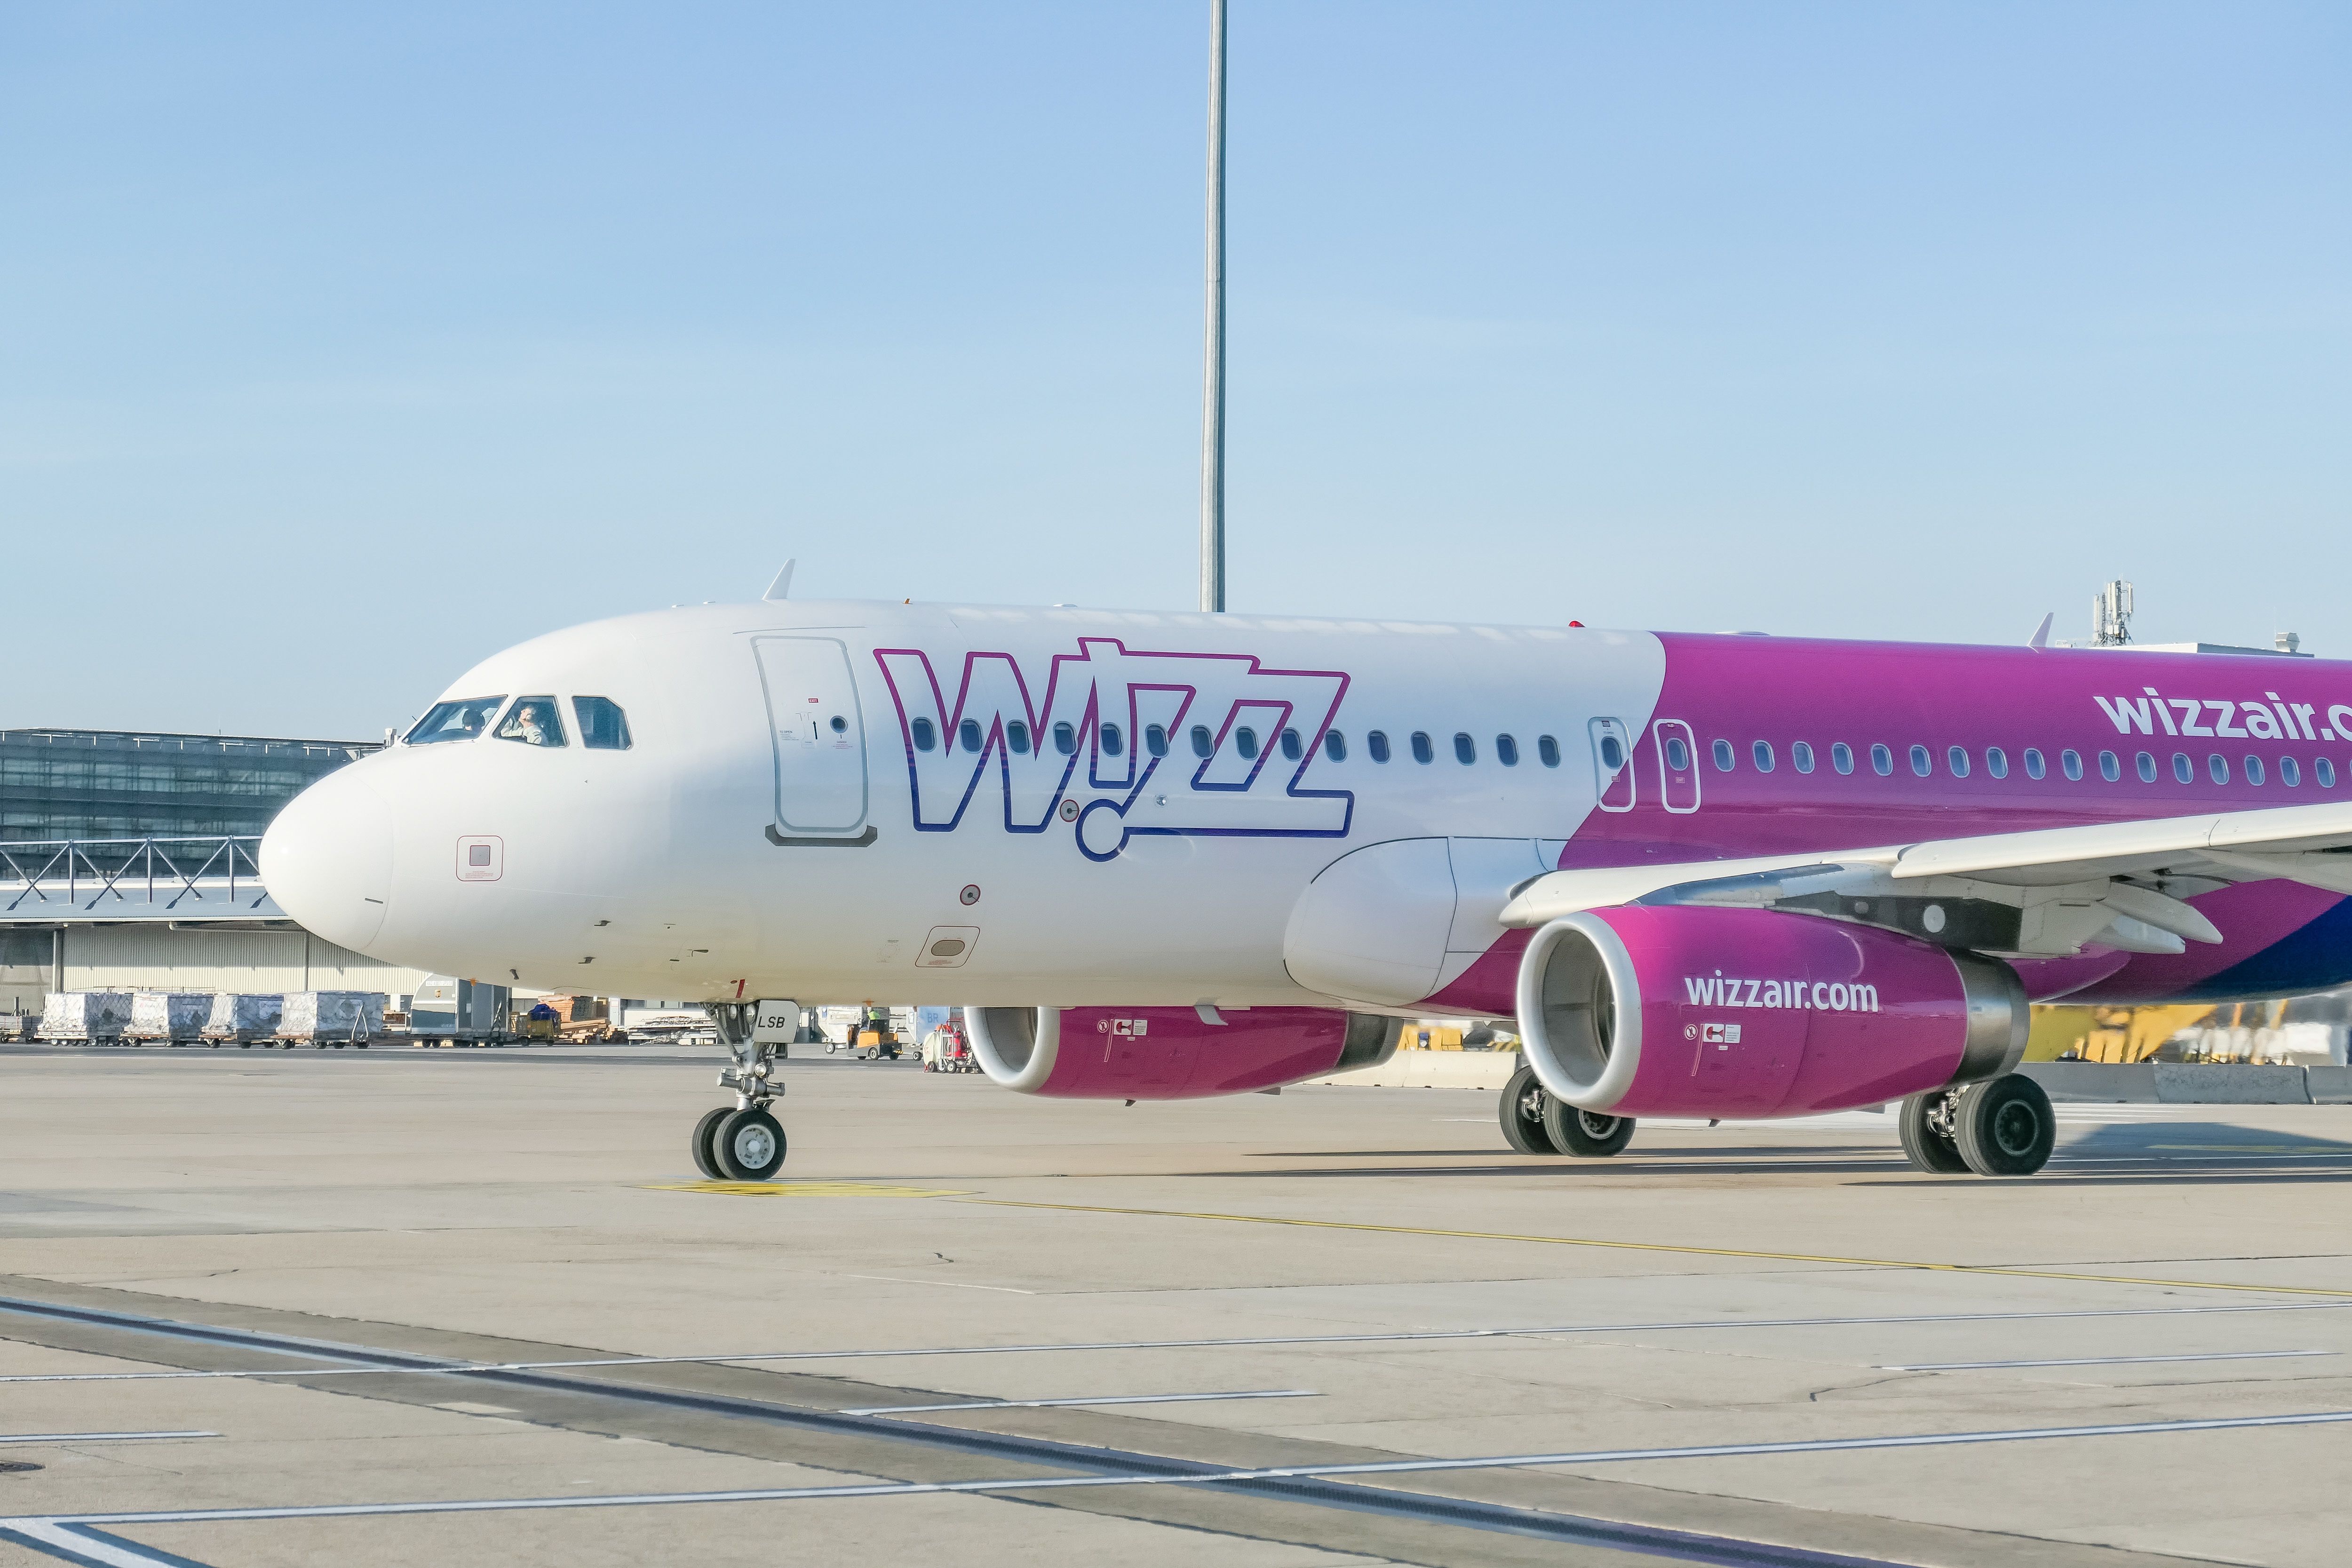 Wizz Air Airbus A320 aircraft taxiing 